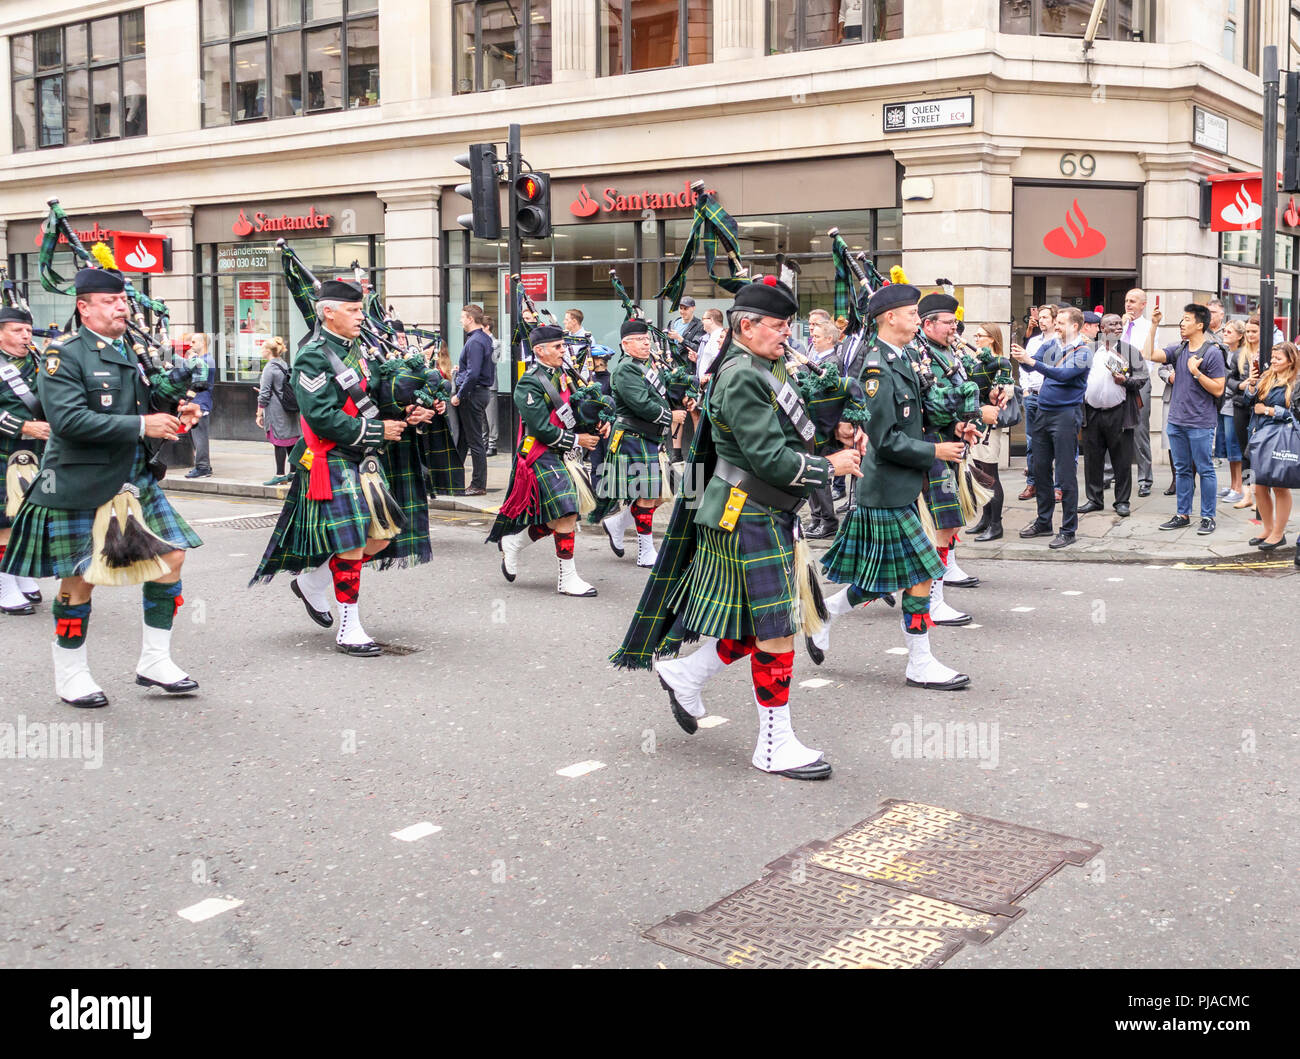 City of London, London EC4, UK, 05th September 2018. The Royal Regiment of Fusiliers celebrates 50 years. The regiment exercises its rights as a Privileged Regiment to march through the streets of the City of London, from the Tower of London to the Guildhall, here passing along Queen Street in the City of London EC4. Over 500 serving and retired personnel take part in the parade with veterans and affiliated overseas regiments including those here from the Royal Victoria Regiment in Australia with kilted pipers playing bagpipes. Credit: Graham Prentice/Alamy Live News. Stock Photo